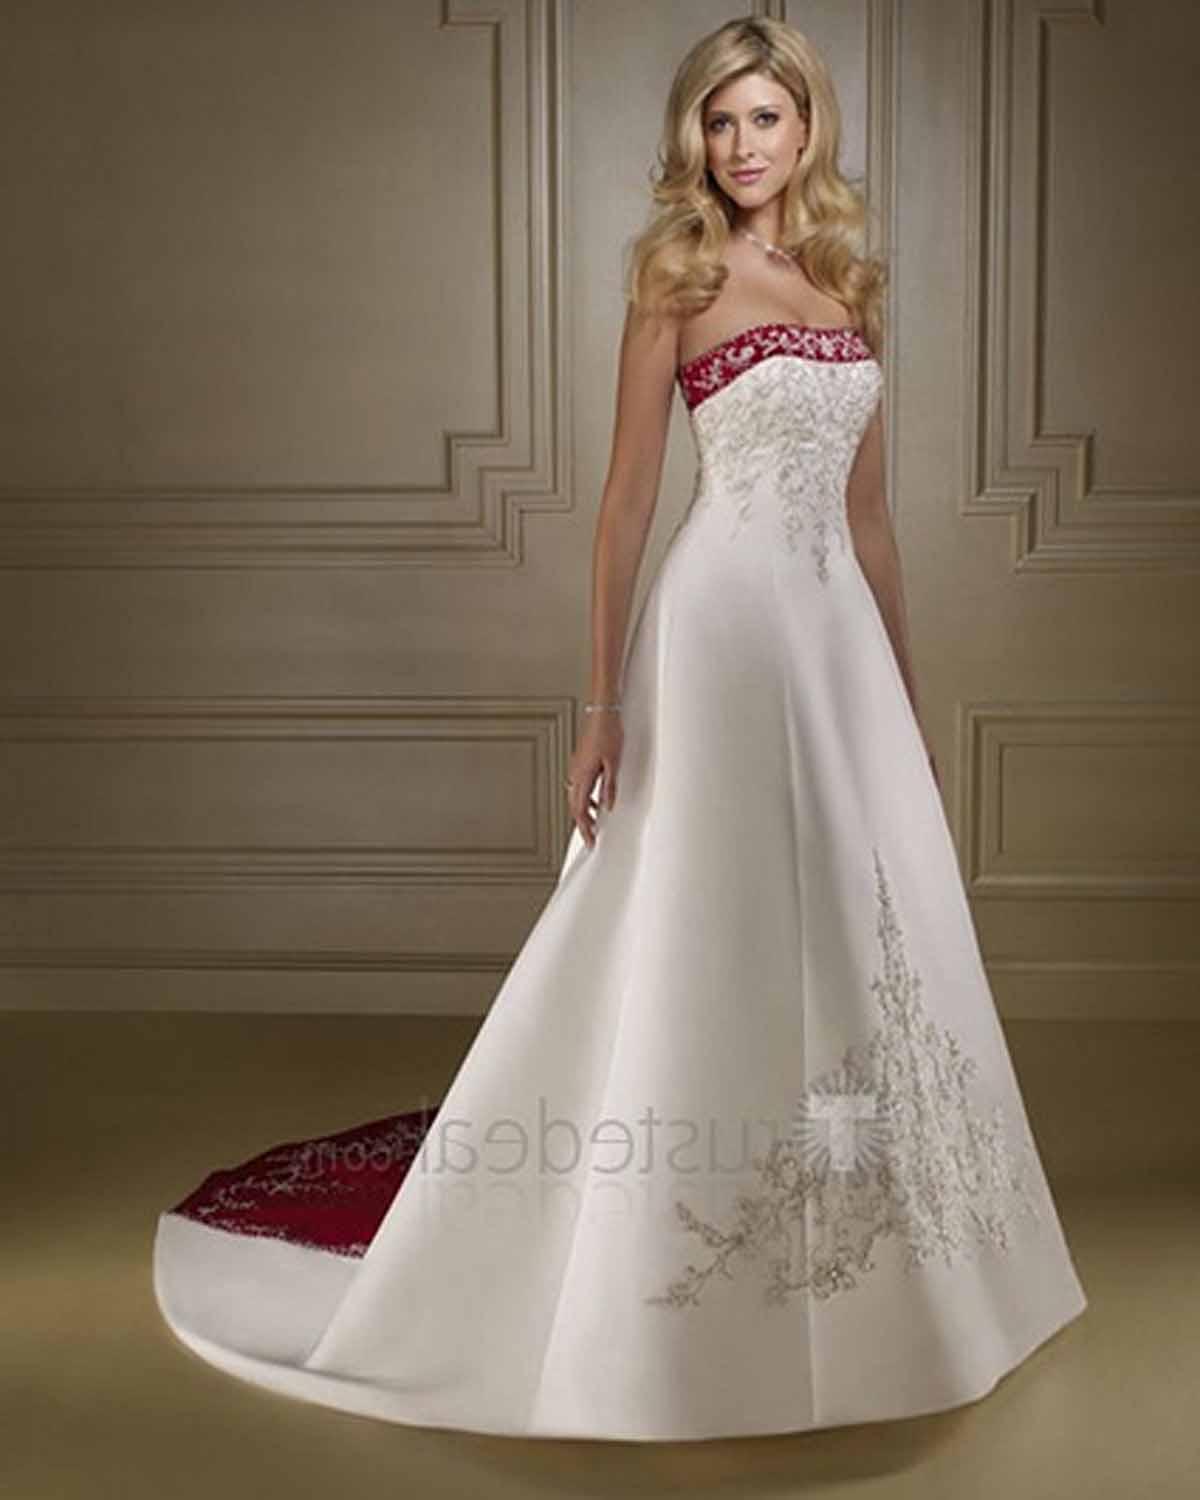 lace wedding dresses vintage inspired This color wedding dress with